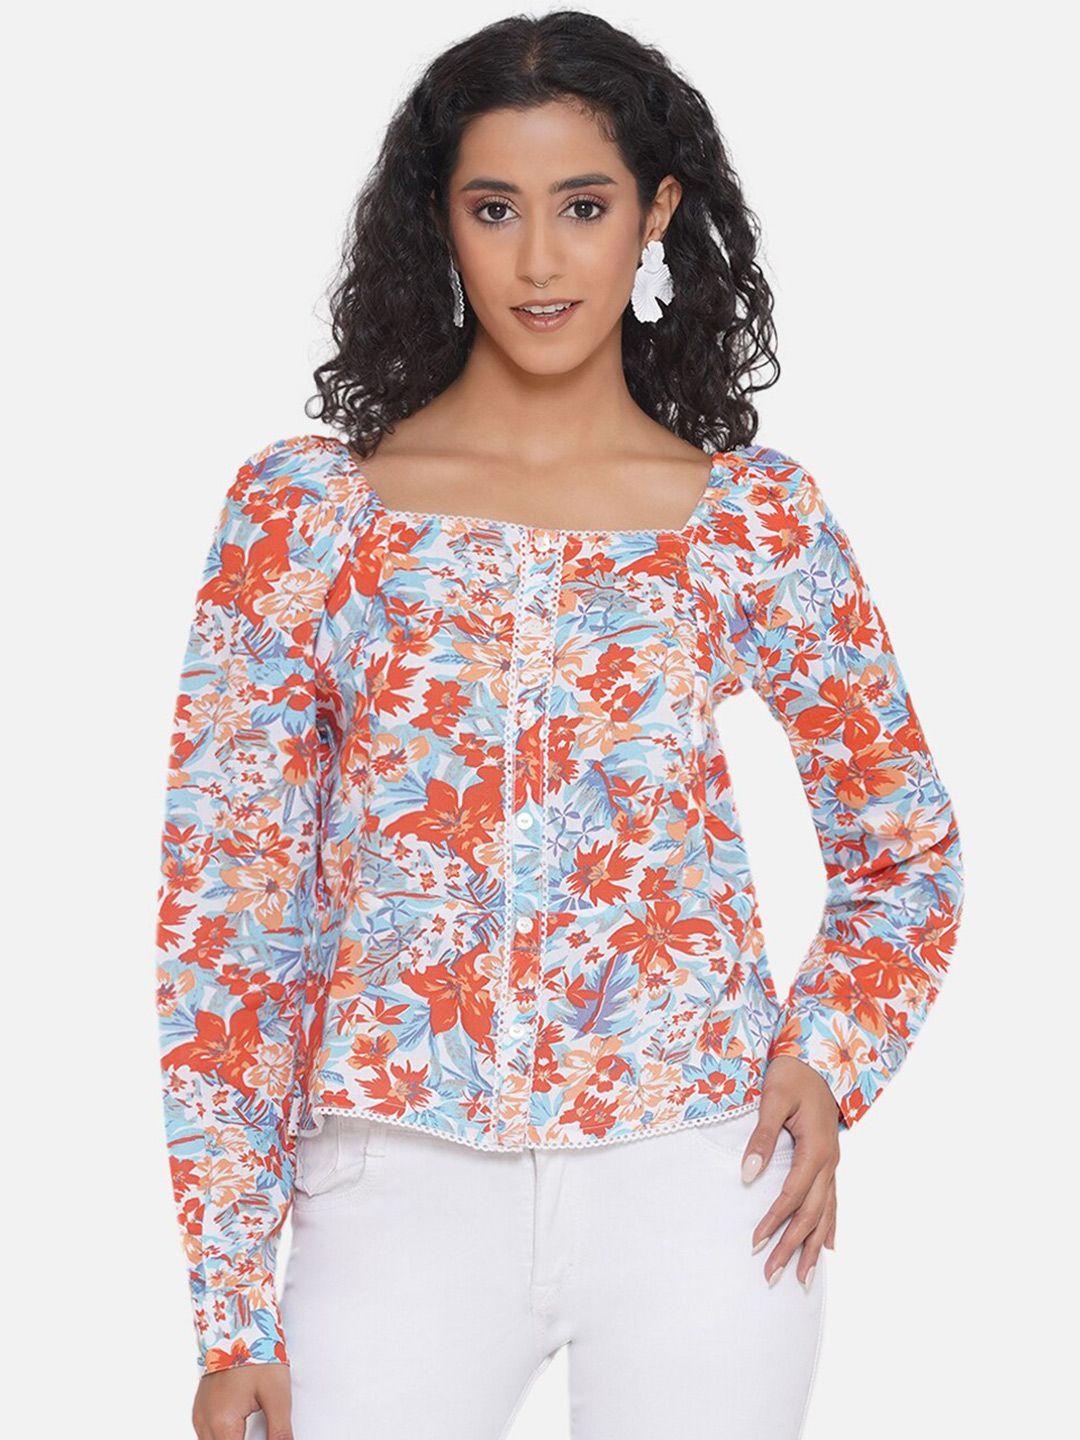 bellamia floral printed square neck puff sleeves top